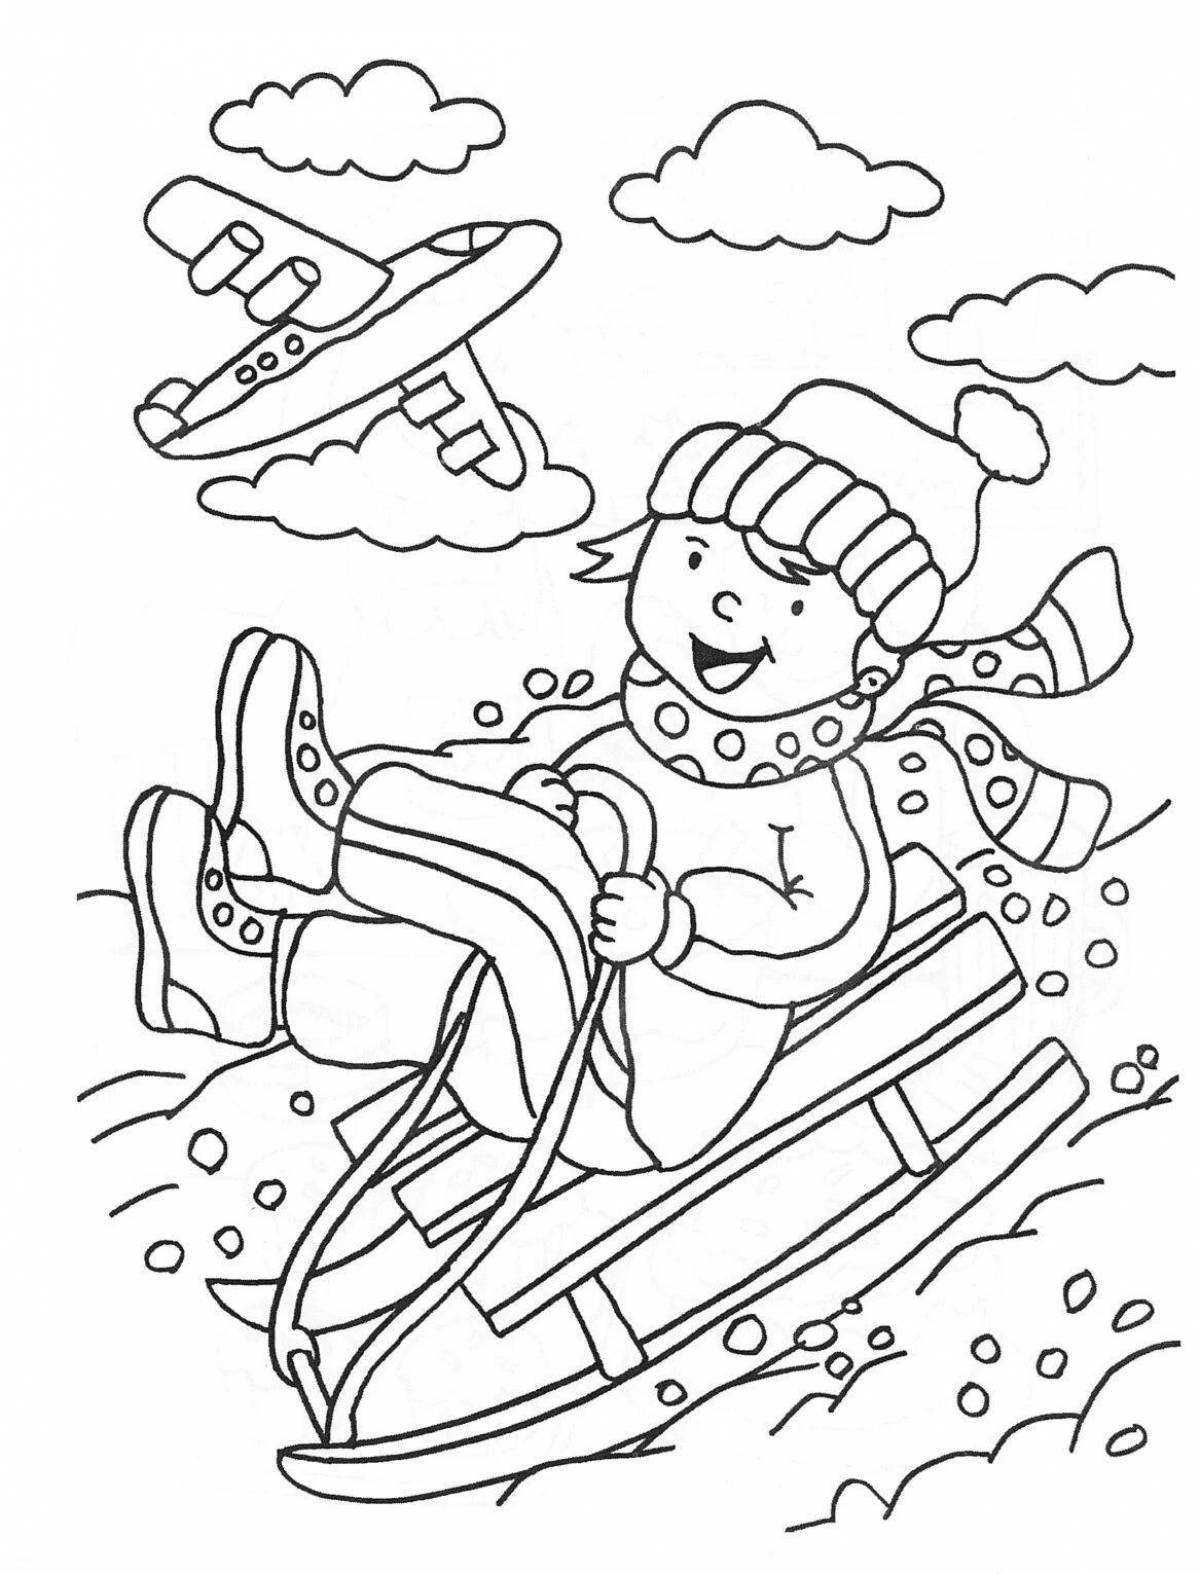 Amazing winter slide coloring page